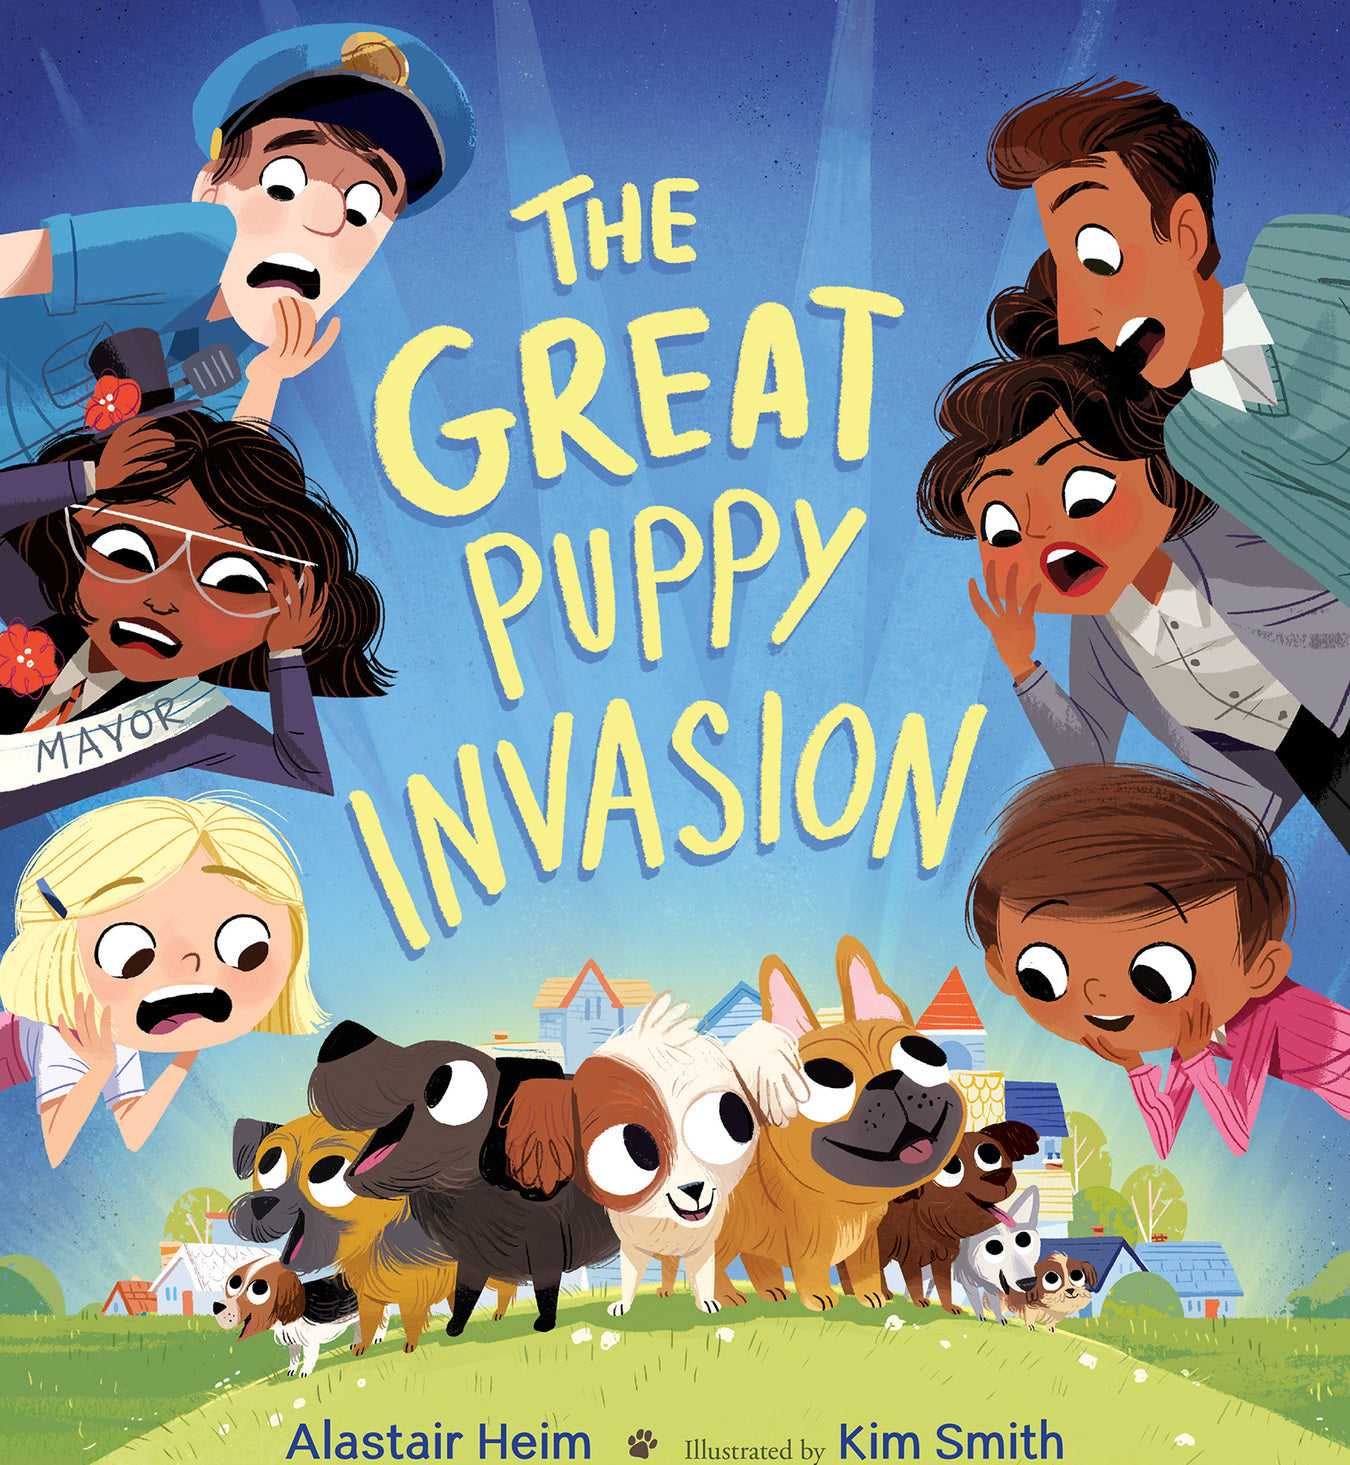 The Great Puppy Invasion